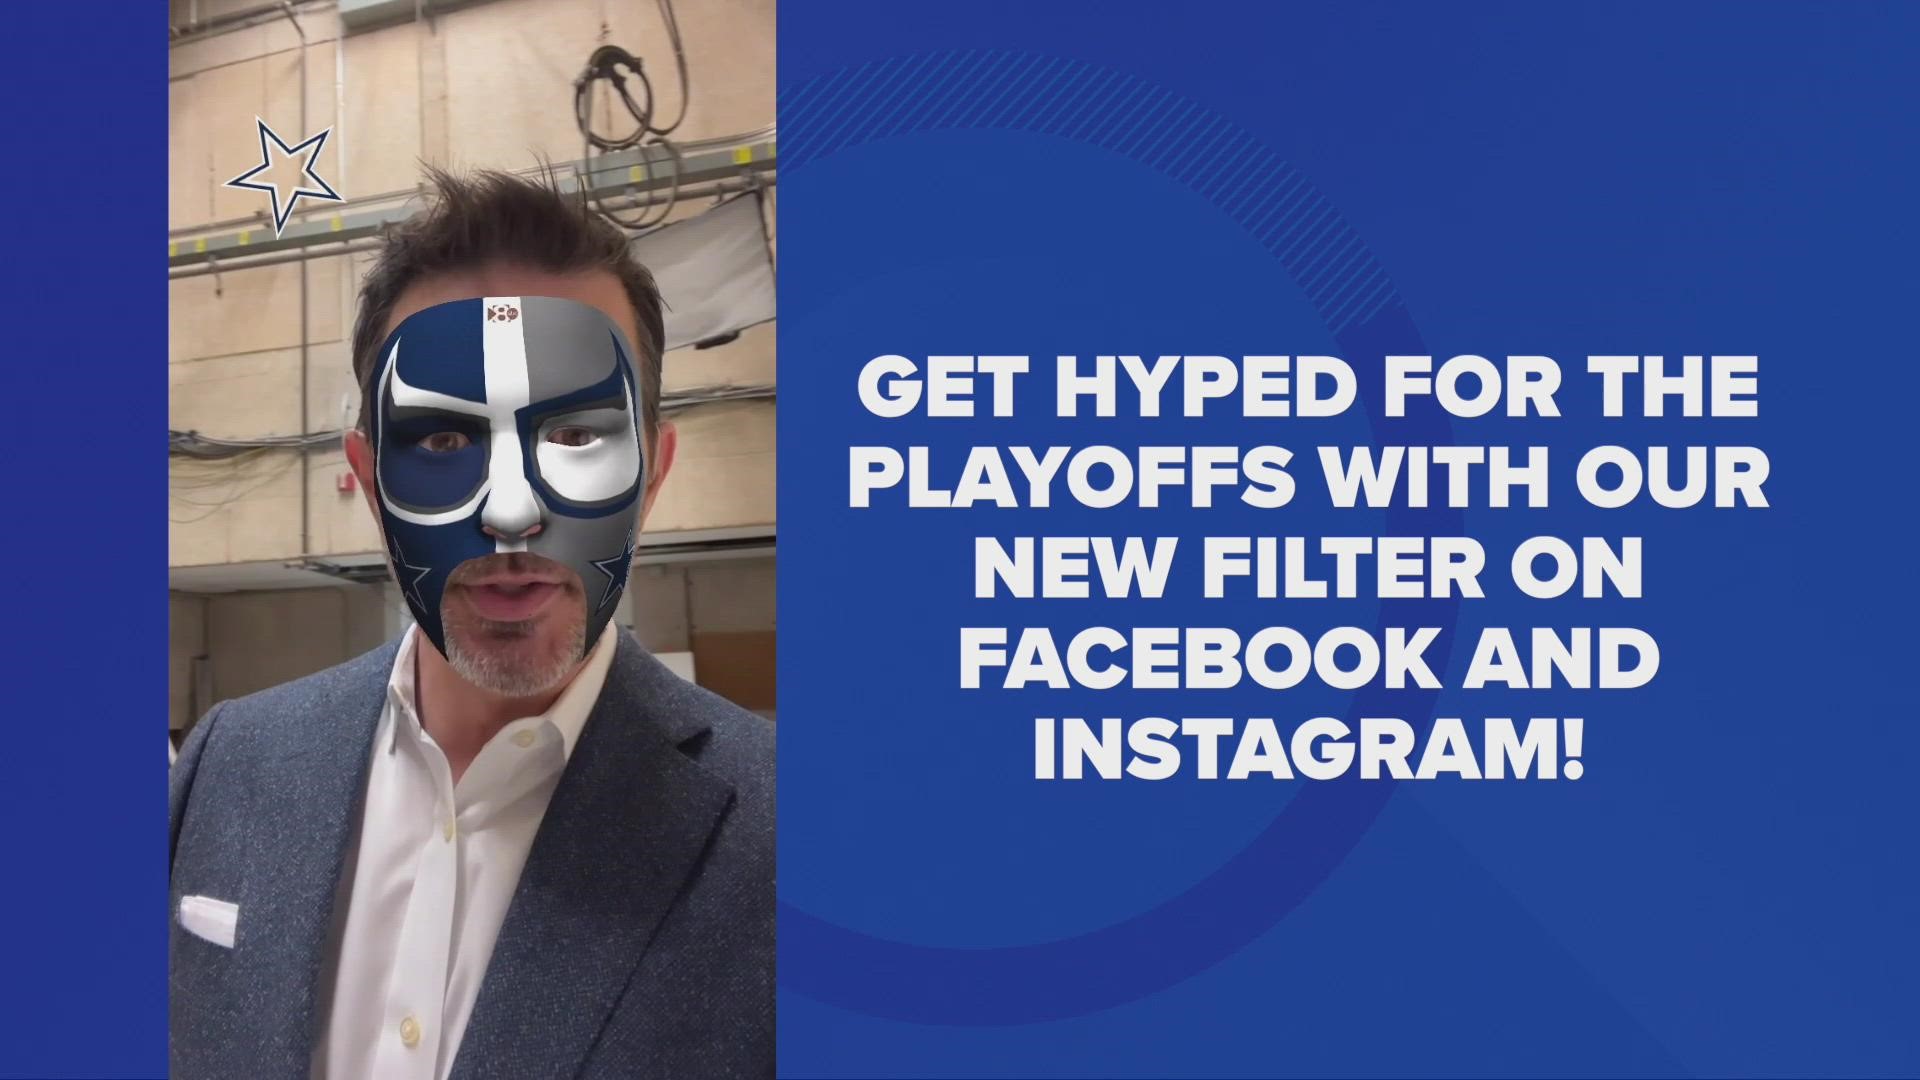 Show your Cowboys spirit with our new filter on Facebook and Instagram.